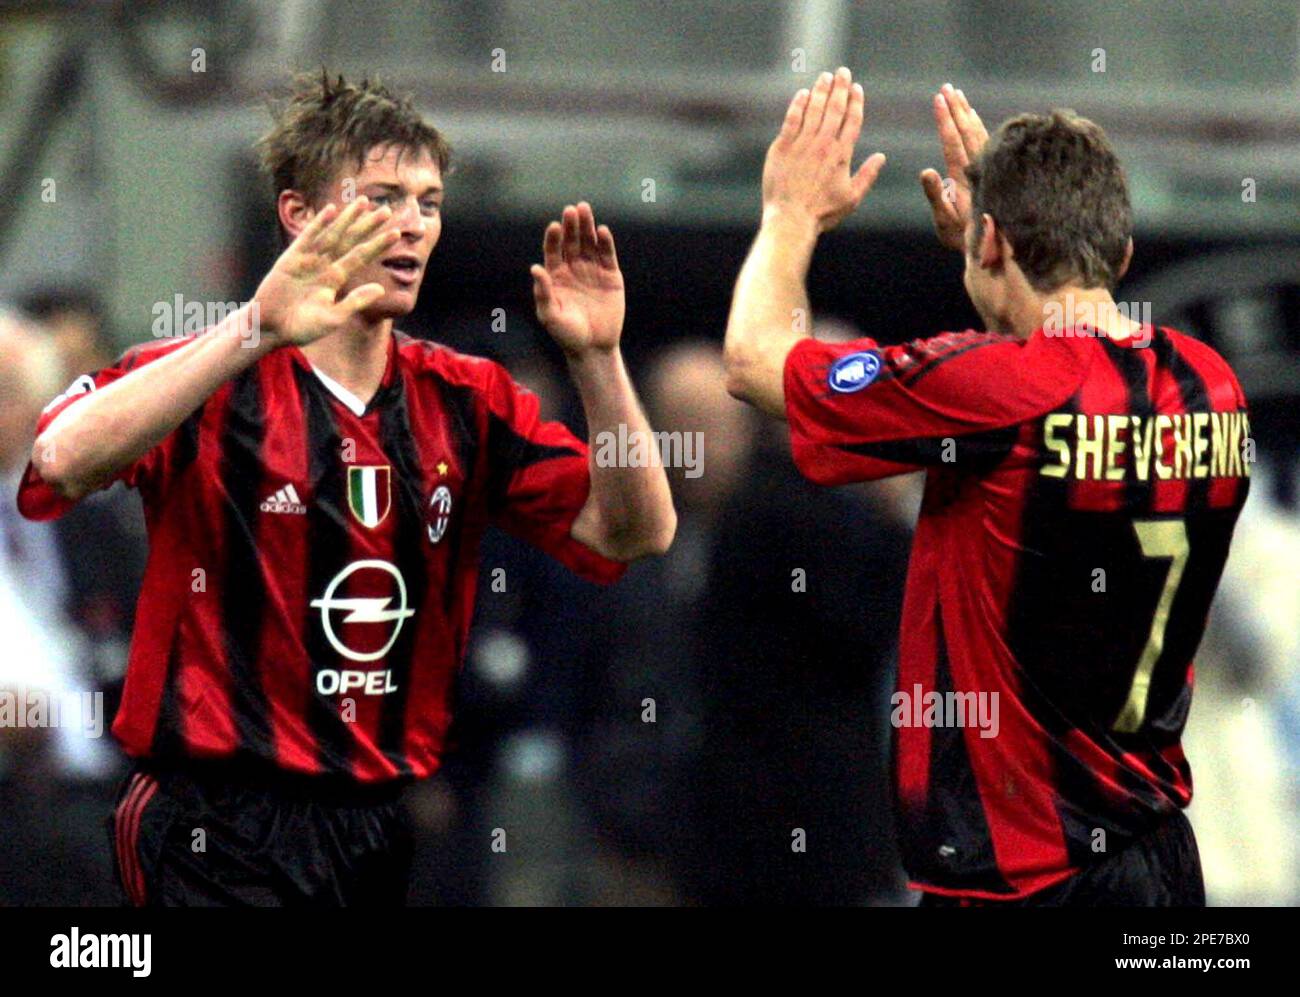 A.C. Milan's forward Jon Dahl Tomasson of Denmark, left, celebrates with  his teammate striker Andriy Shevchenko of Ukraine after scoring against PSV  Eindhoven during the Champions League semi-final first leg soccer match